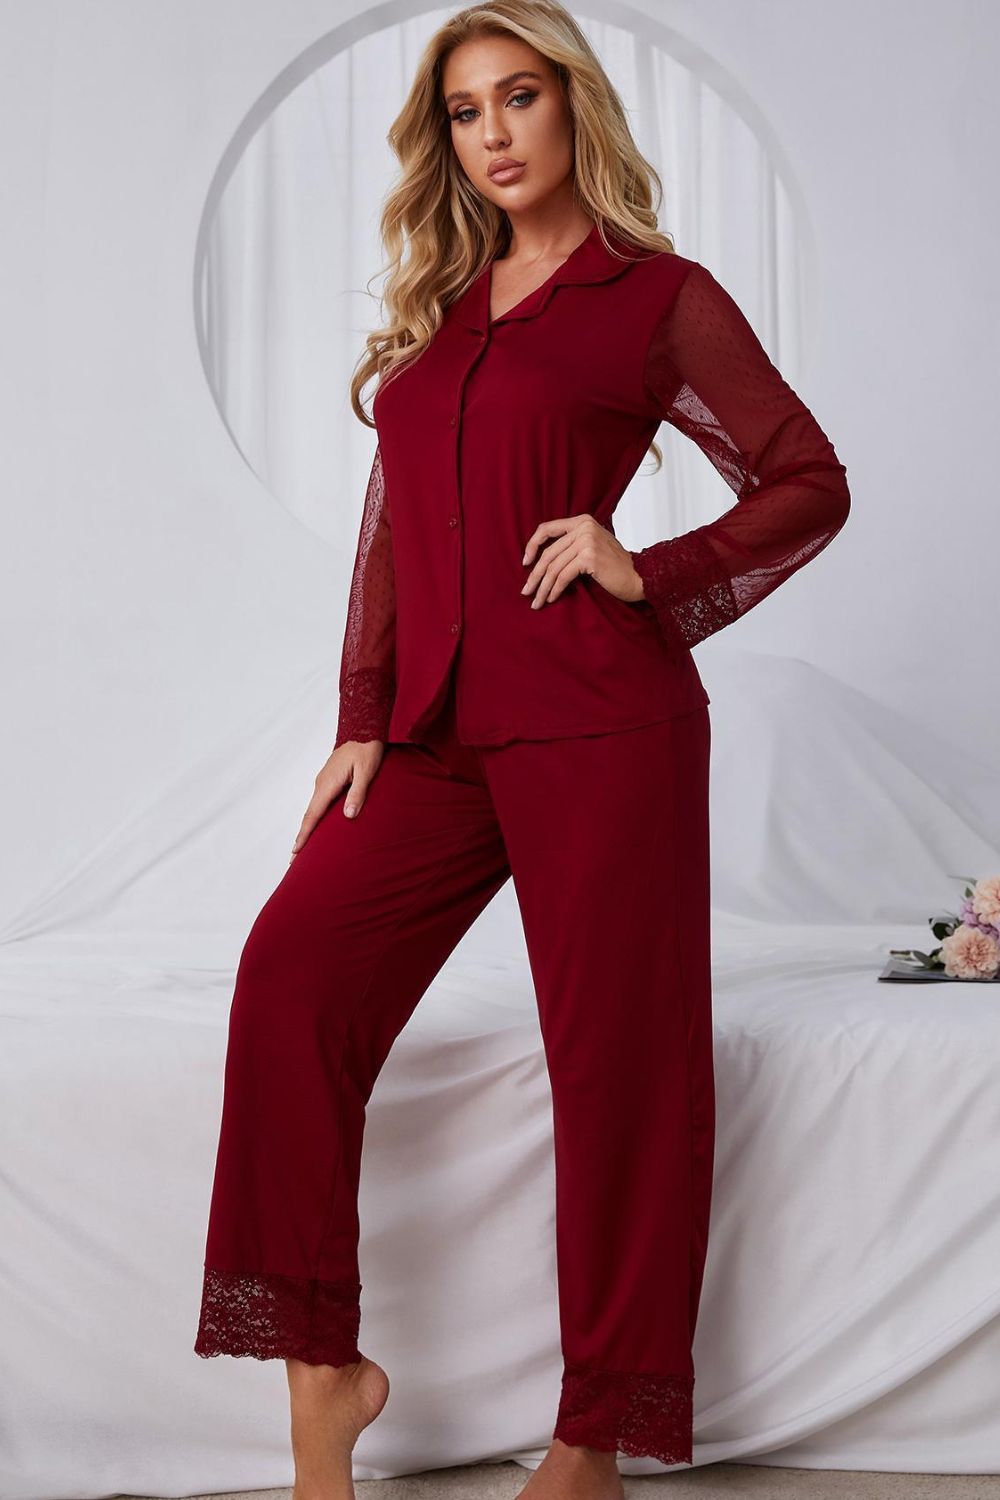 Model standing wearing red pajama set with lace arms